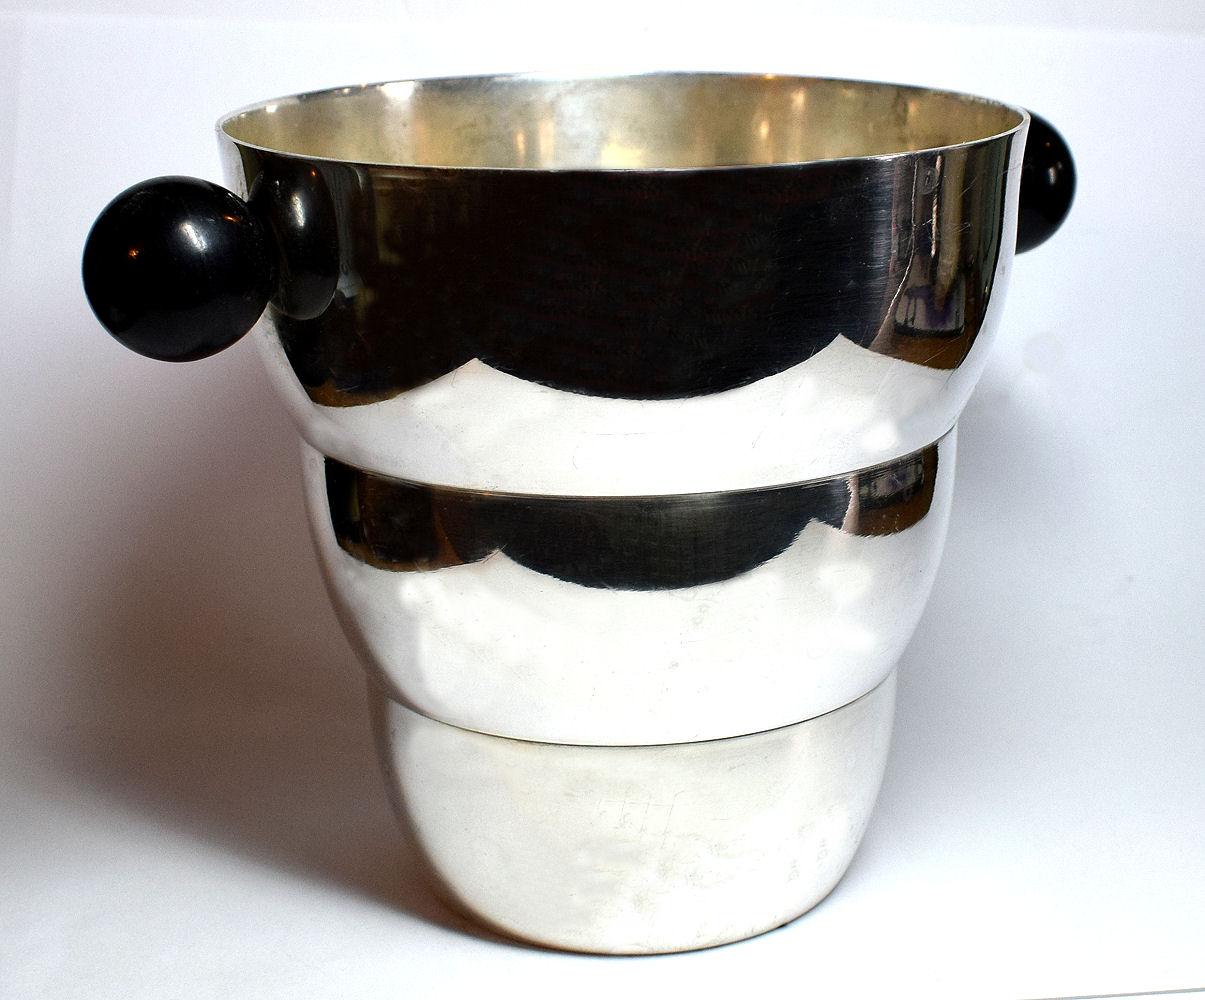 Wonderfully stylish 1930s ice bucket. Silvered plated with black bakelite ball shaped handles this ice bucket has an almost beehive shape and looks great on display. There is some light surface scratches and marks but no dents or dings, altogether